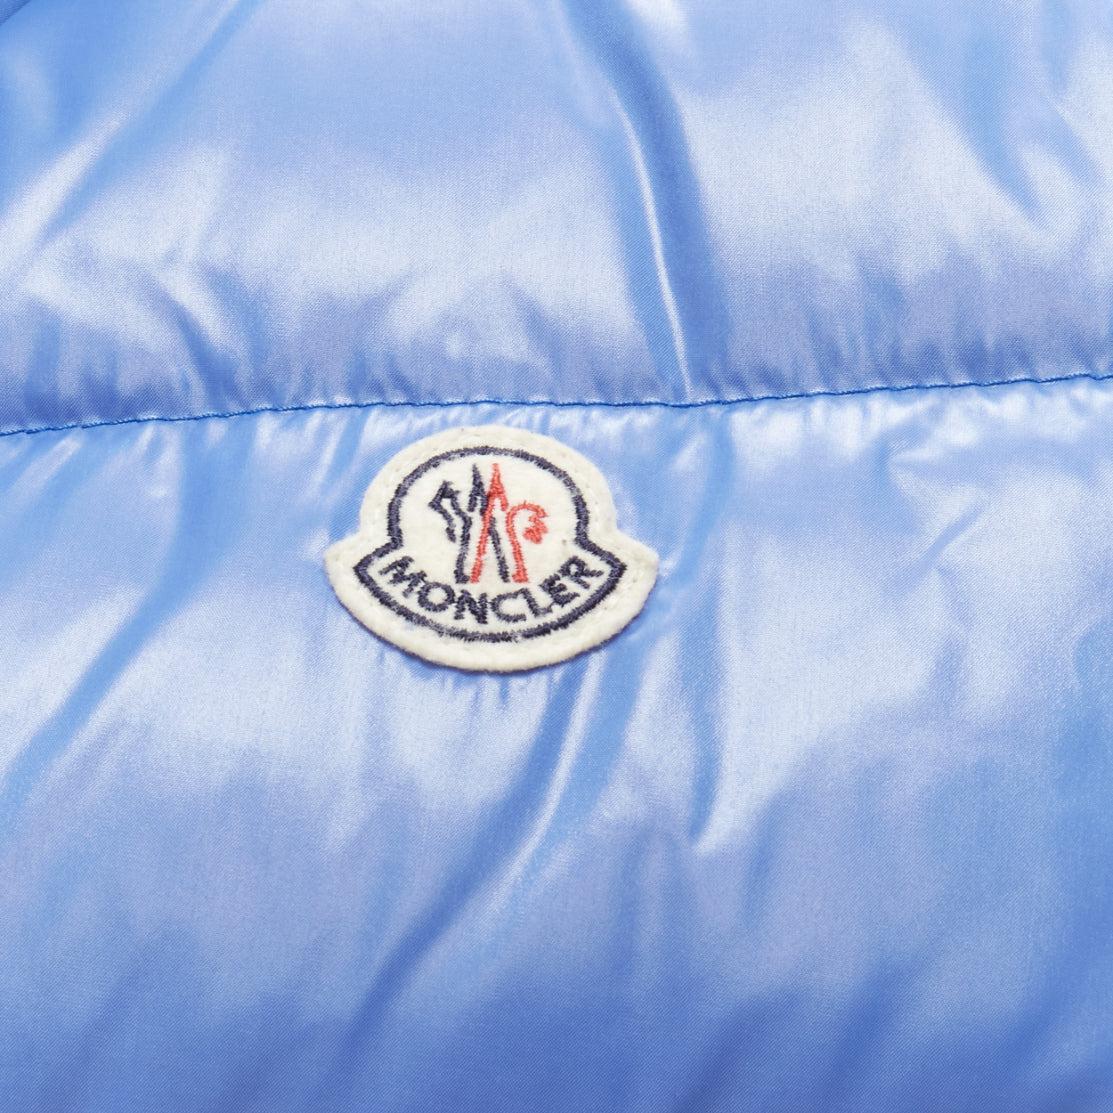 MONCLER Tib Gilet blue down feather high neck padded puffer vest jacket Size3 M
Reference: JSLE/A00001
Brand: Moncler
Model: Tib Gilet
Material: Polyamide
Color: Blue
Pattern: Solid
Closure: Zip
Lining: Black Down
Extra Details: Logo patch at front